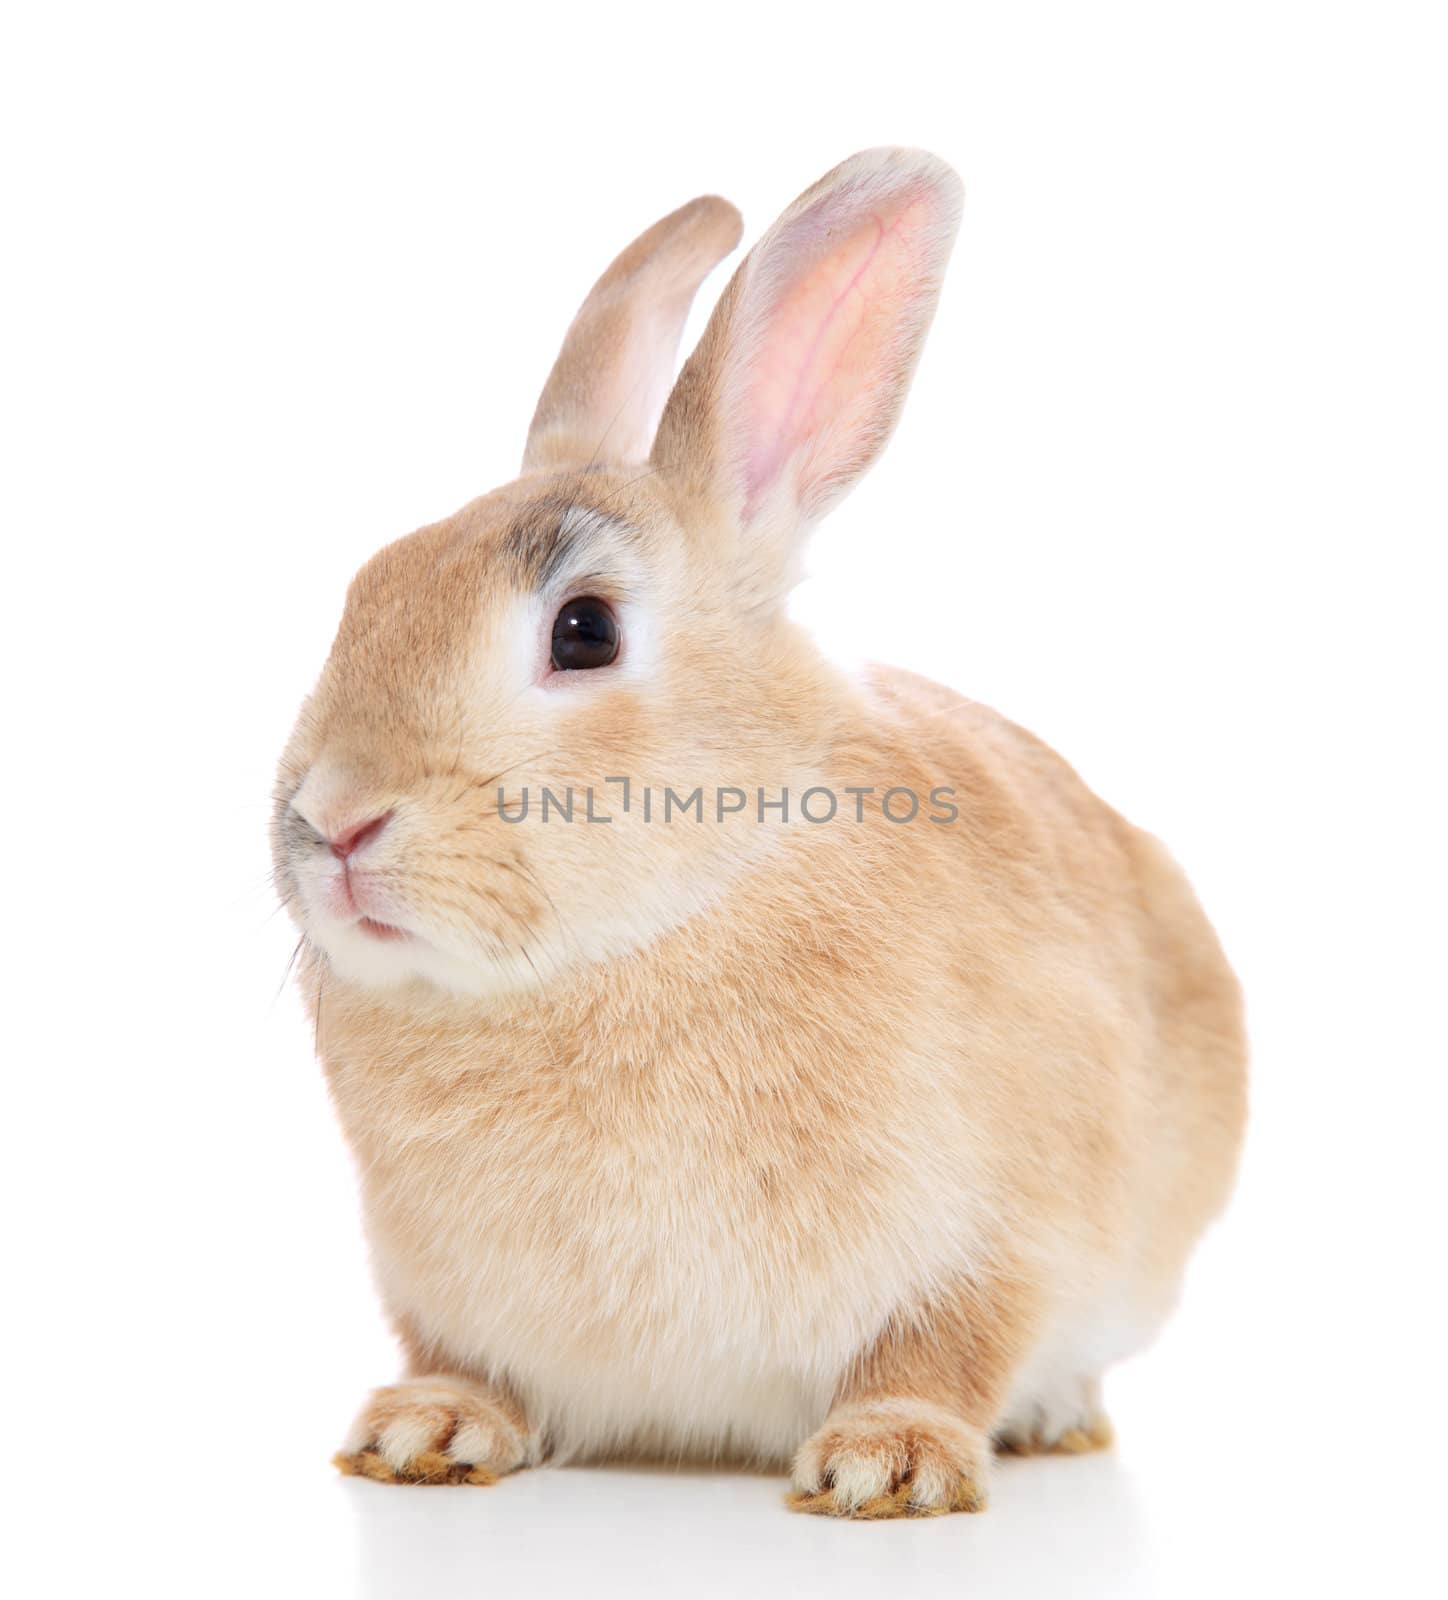 Cute little brown bunny. All on white background.